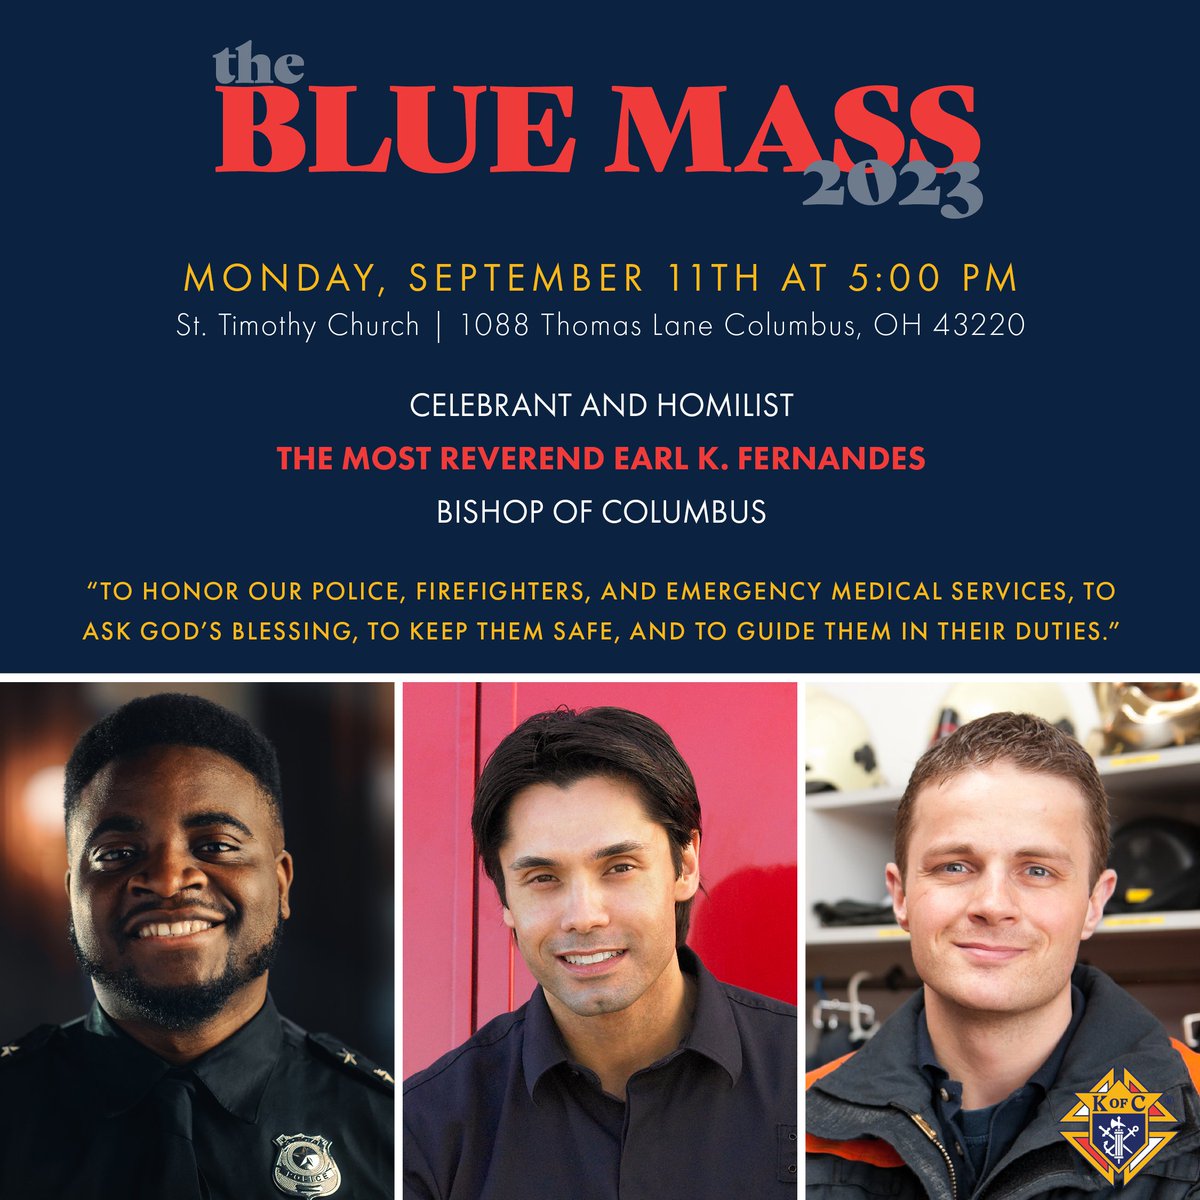 The Blue Mass, honoring police, firefighters, and emergency medical services, is tonight at St. Timothy in Columbus!

#bluemass #knightsofcolumbus #ColumbusCatholic